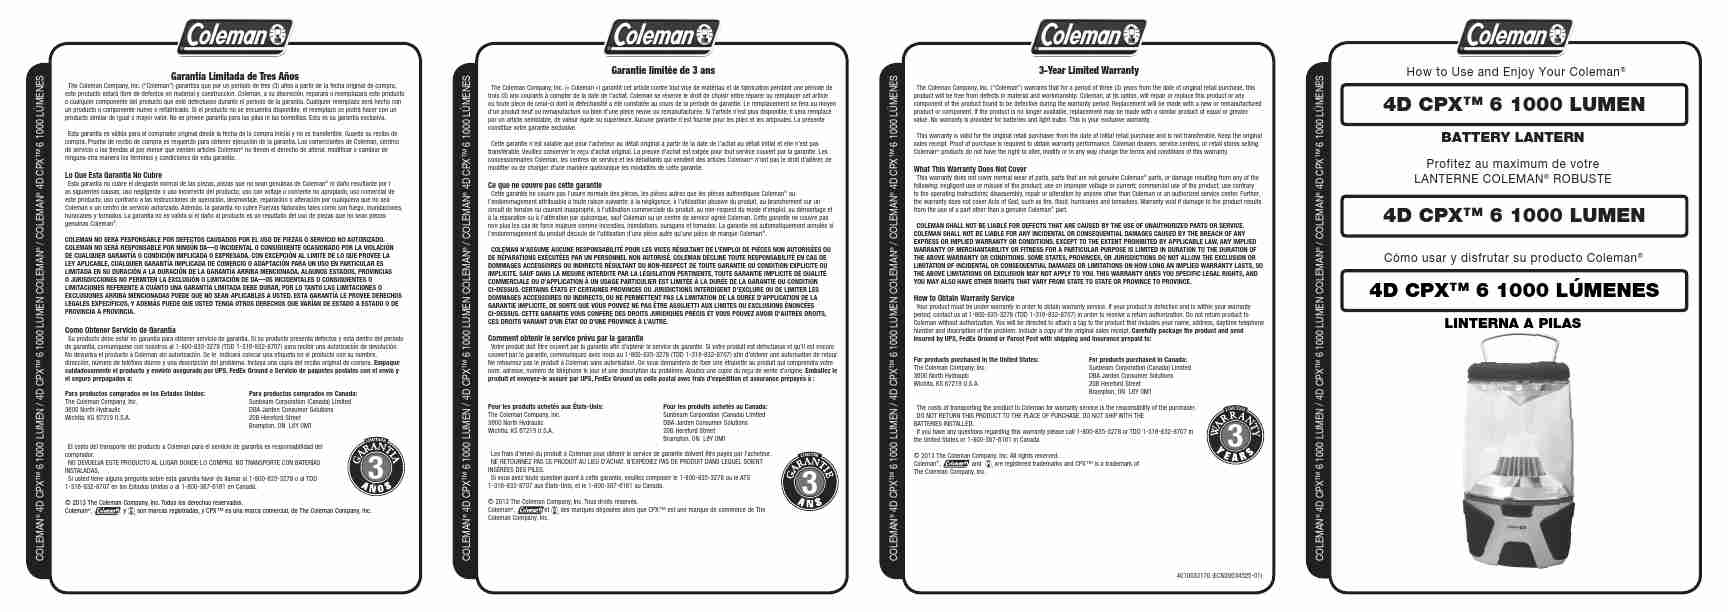 Coleman Camping Equipment 4D CPX 6 1000 LUMEN-page_pdf